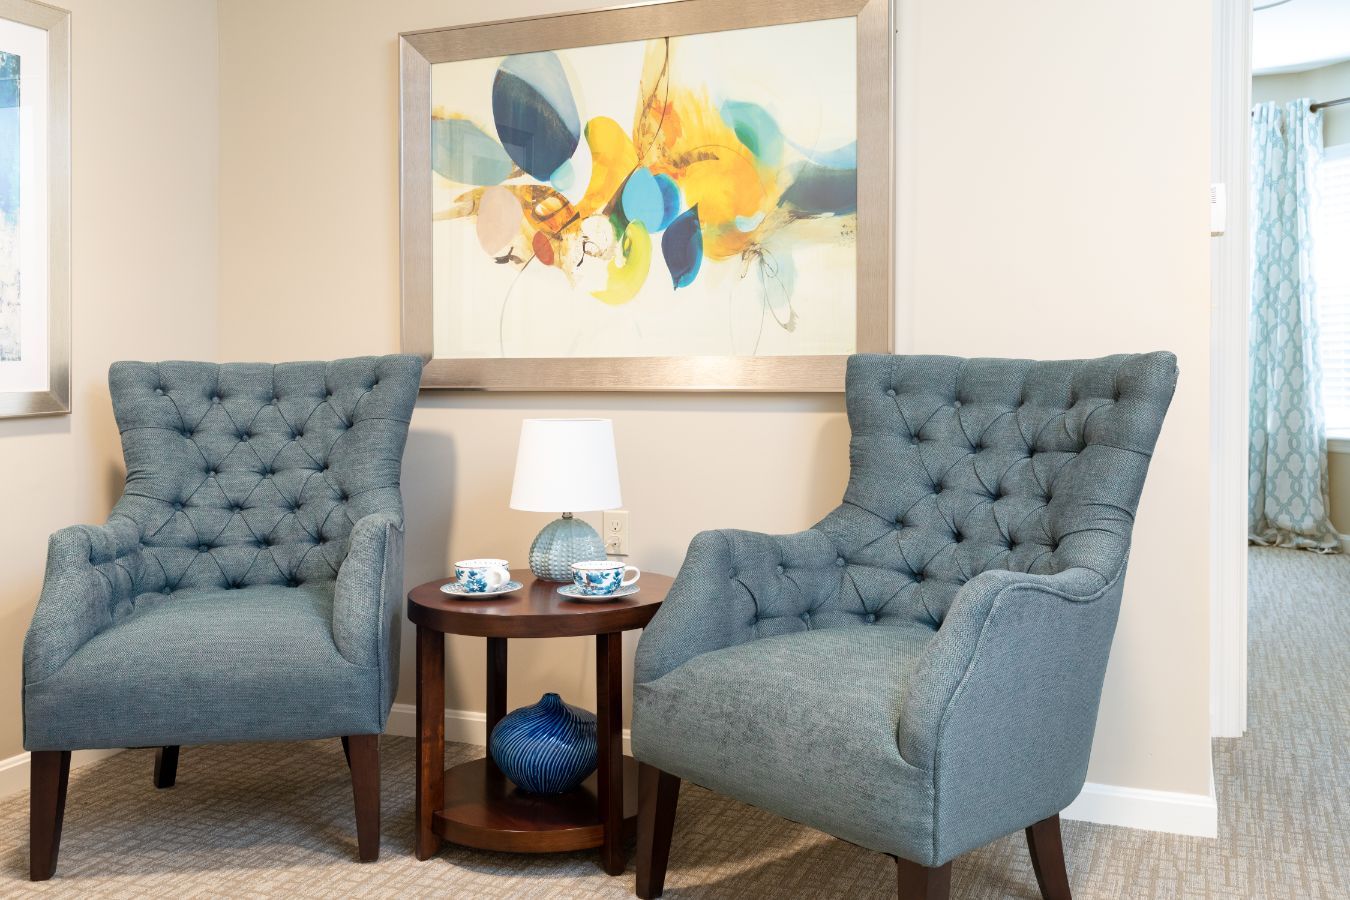 Artistic interior of New Pond Village senior living community featuring furniture, paintings, and armchairs.